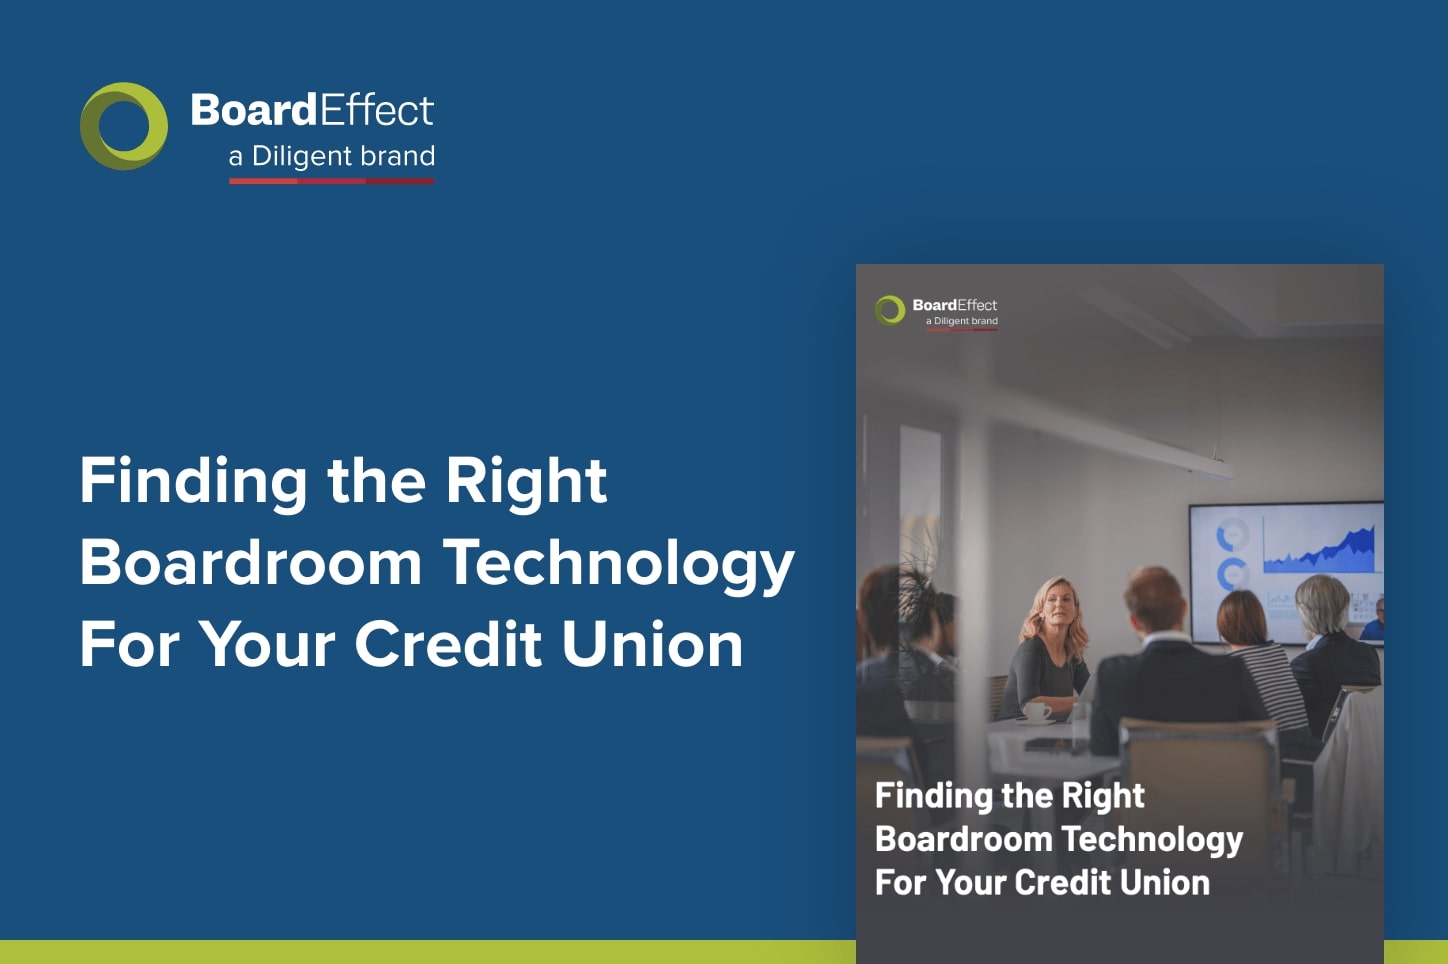 BoardEffect Boardroom Technology for Credit Unions